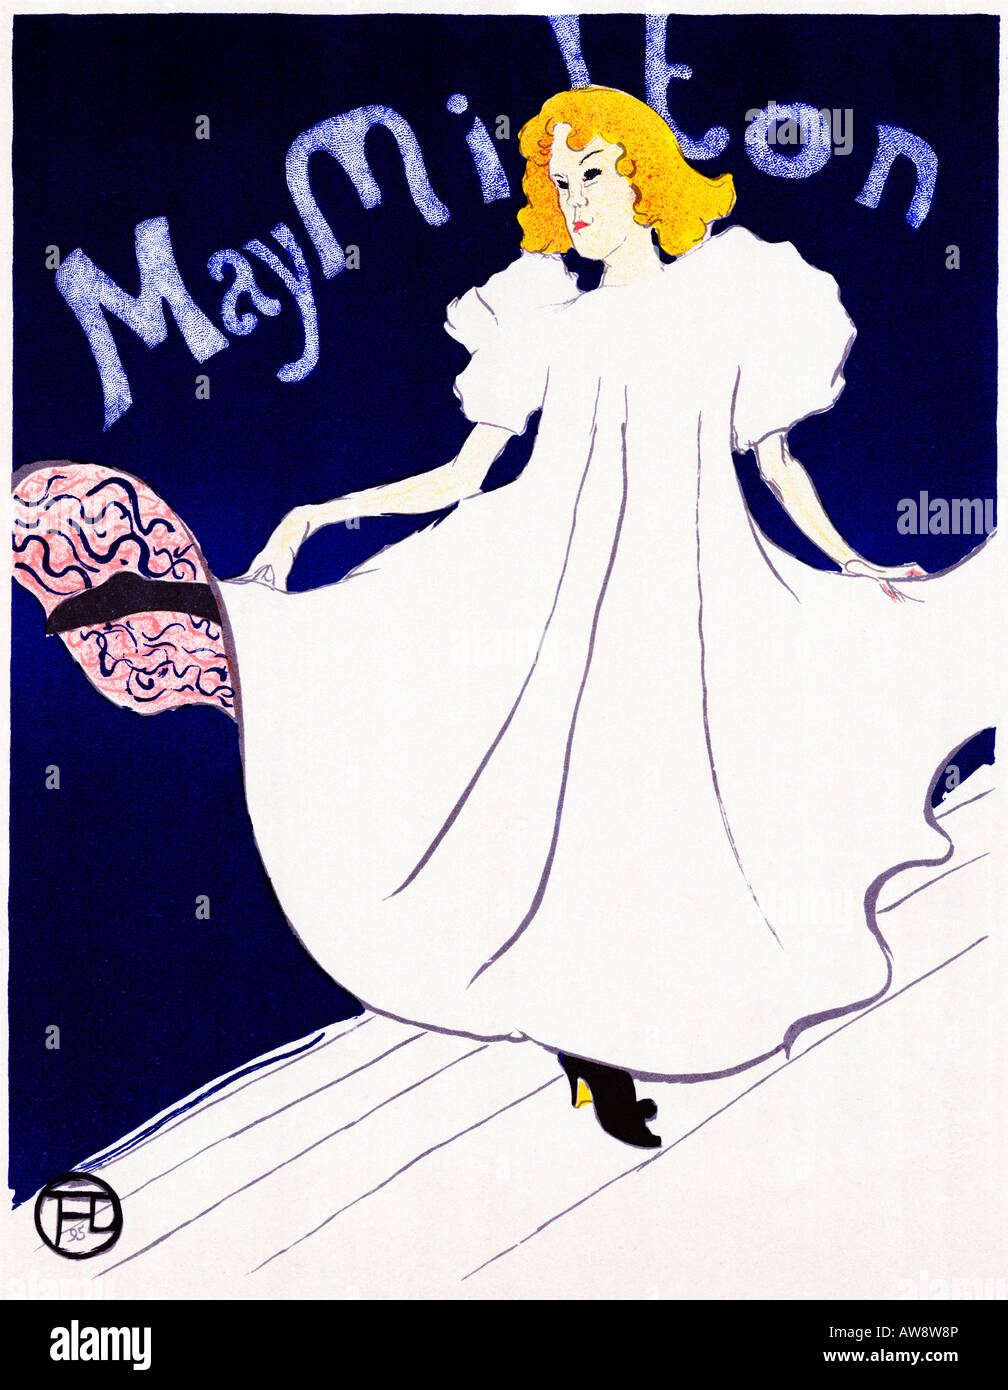 May Milton 1895 Art Nouveau poster by Henri de Toulouse Lautrec printed for the tour of the United States by the English dancer Stock Photo